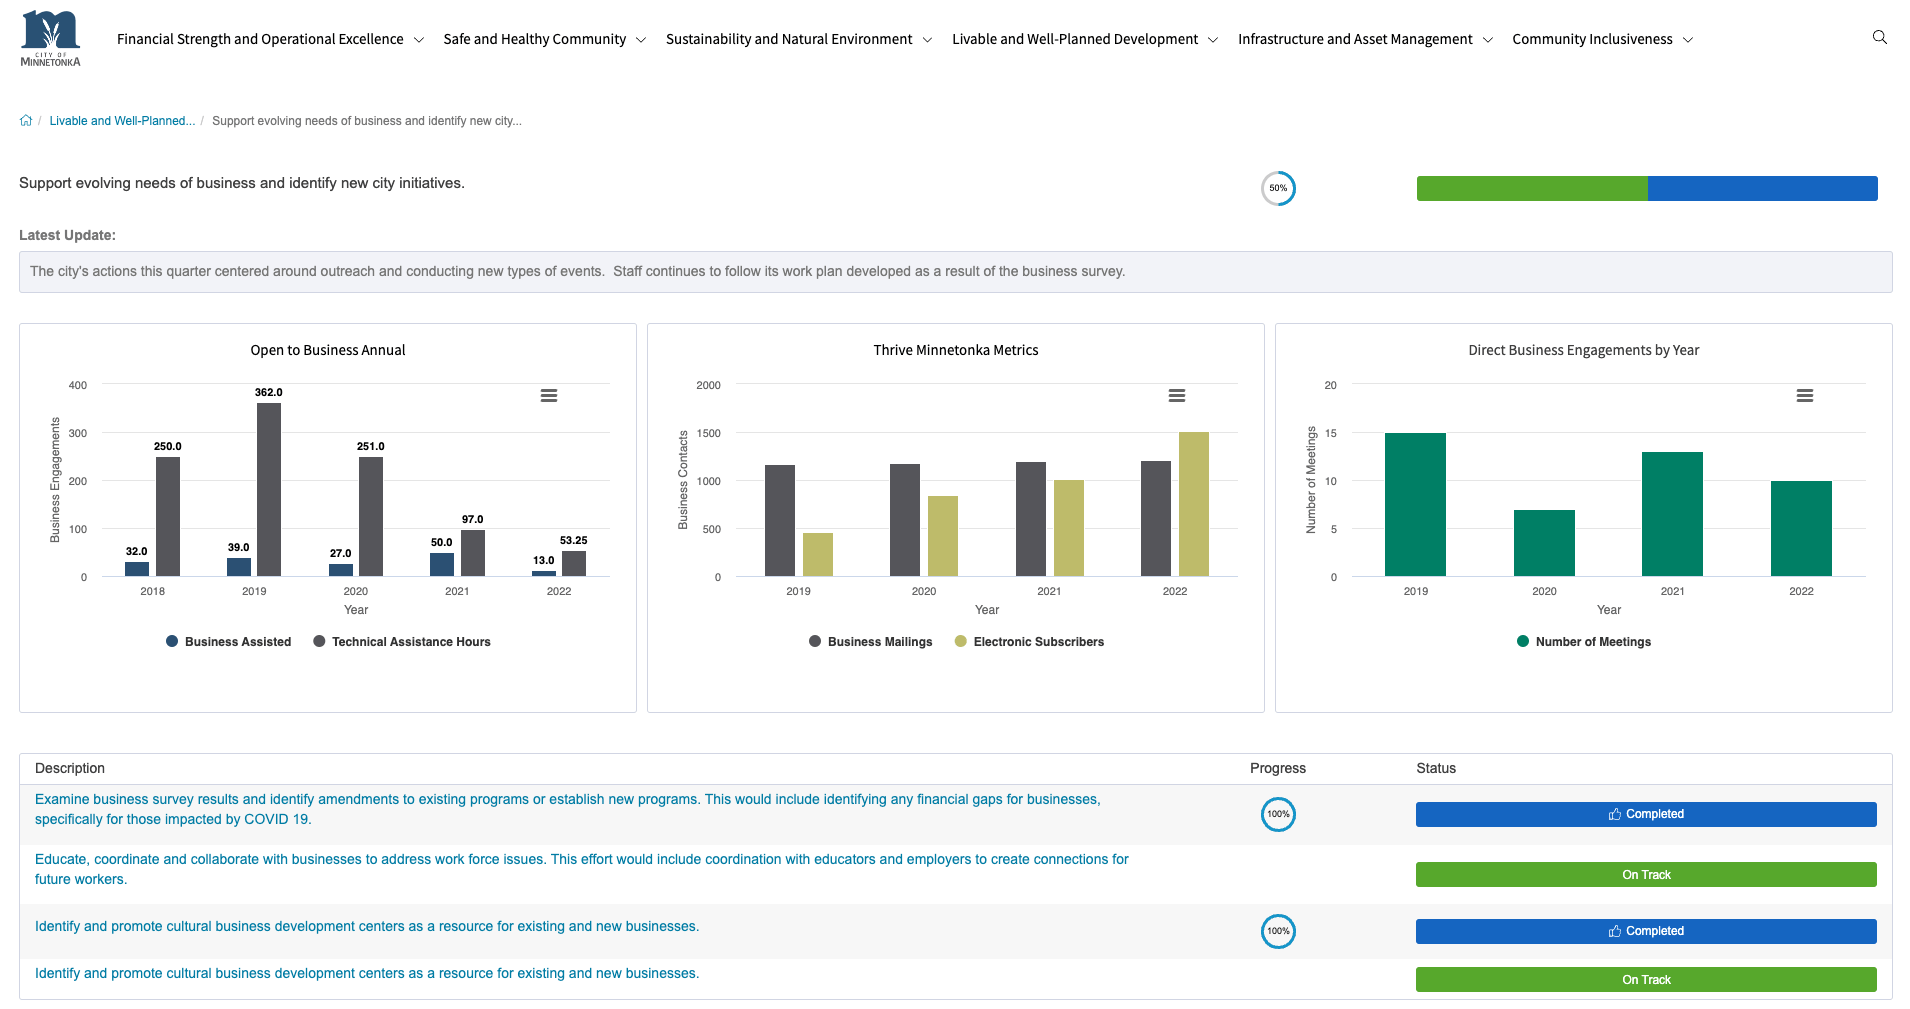 City of Minnetonka dashboard showing performance measures and progress on the strategic pillar: Livable and Well-Planned Development